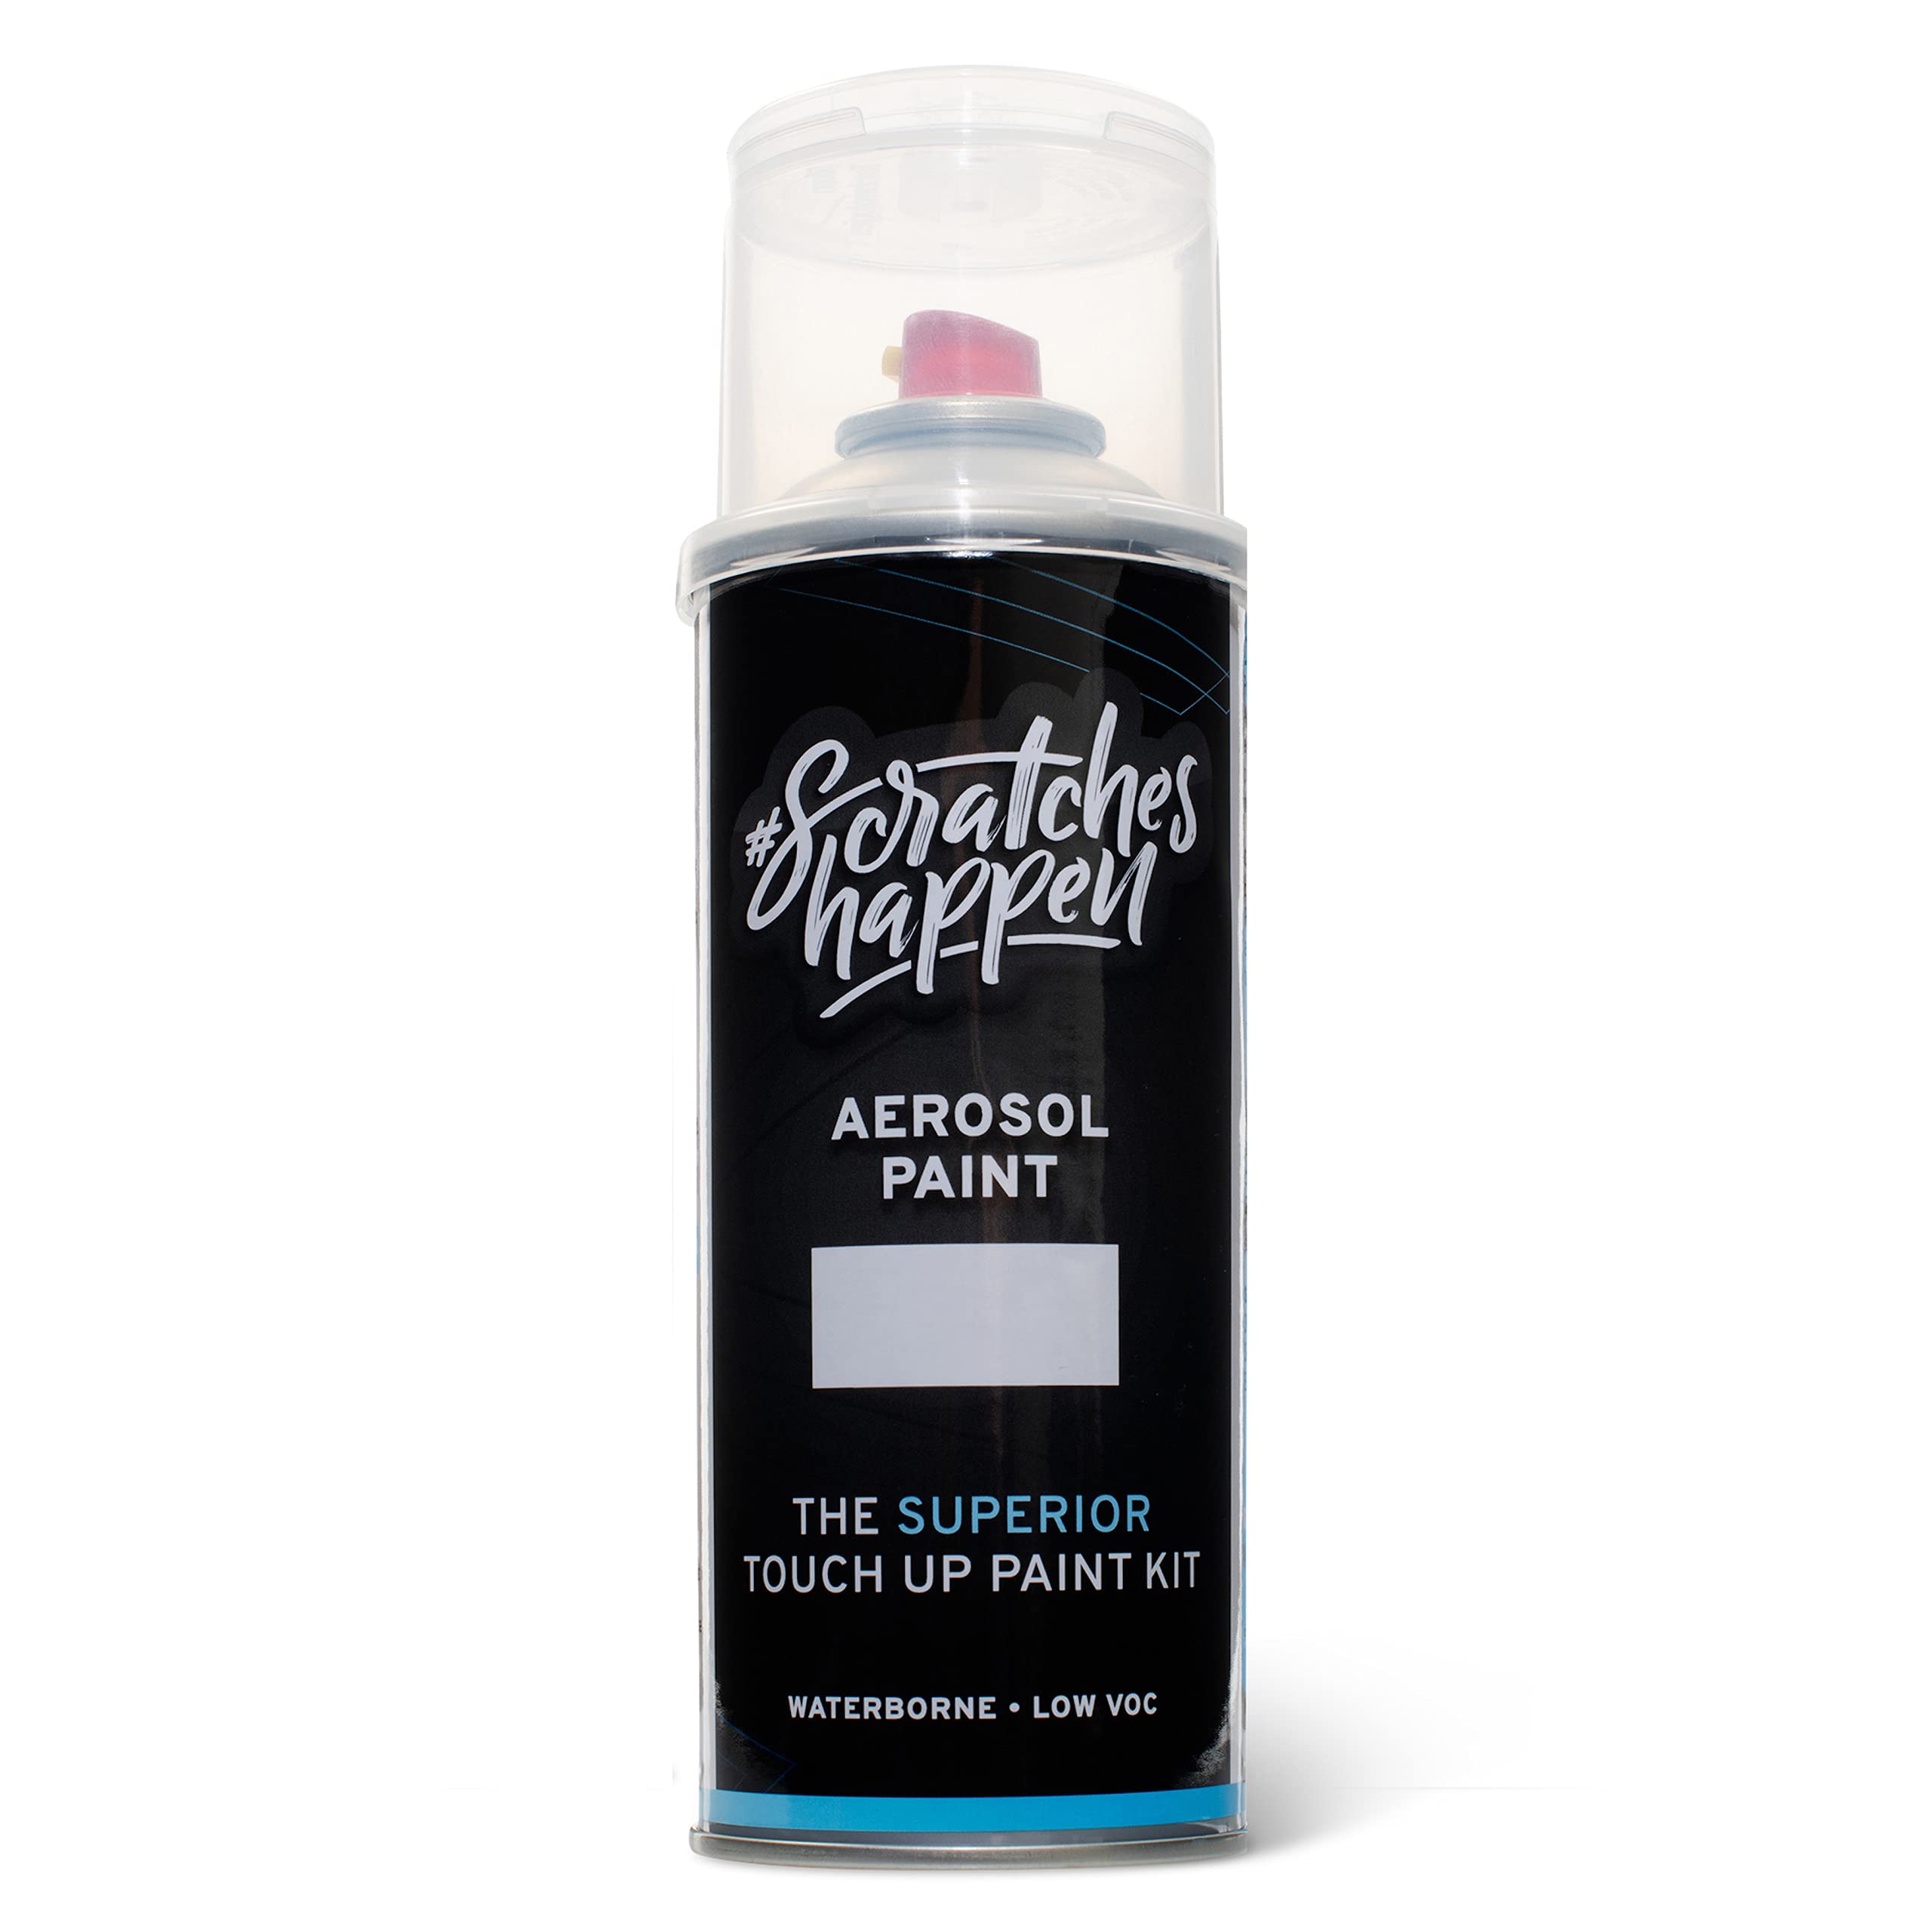 Scratcheshappen Exact-Match Touch Up Paint Kit Compatible With Tesla Red Multi-Coat Tricoat (Pmmrppmr) - Aerosol, Paint Only